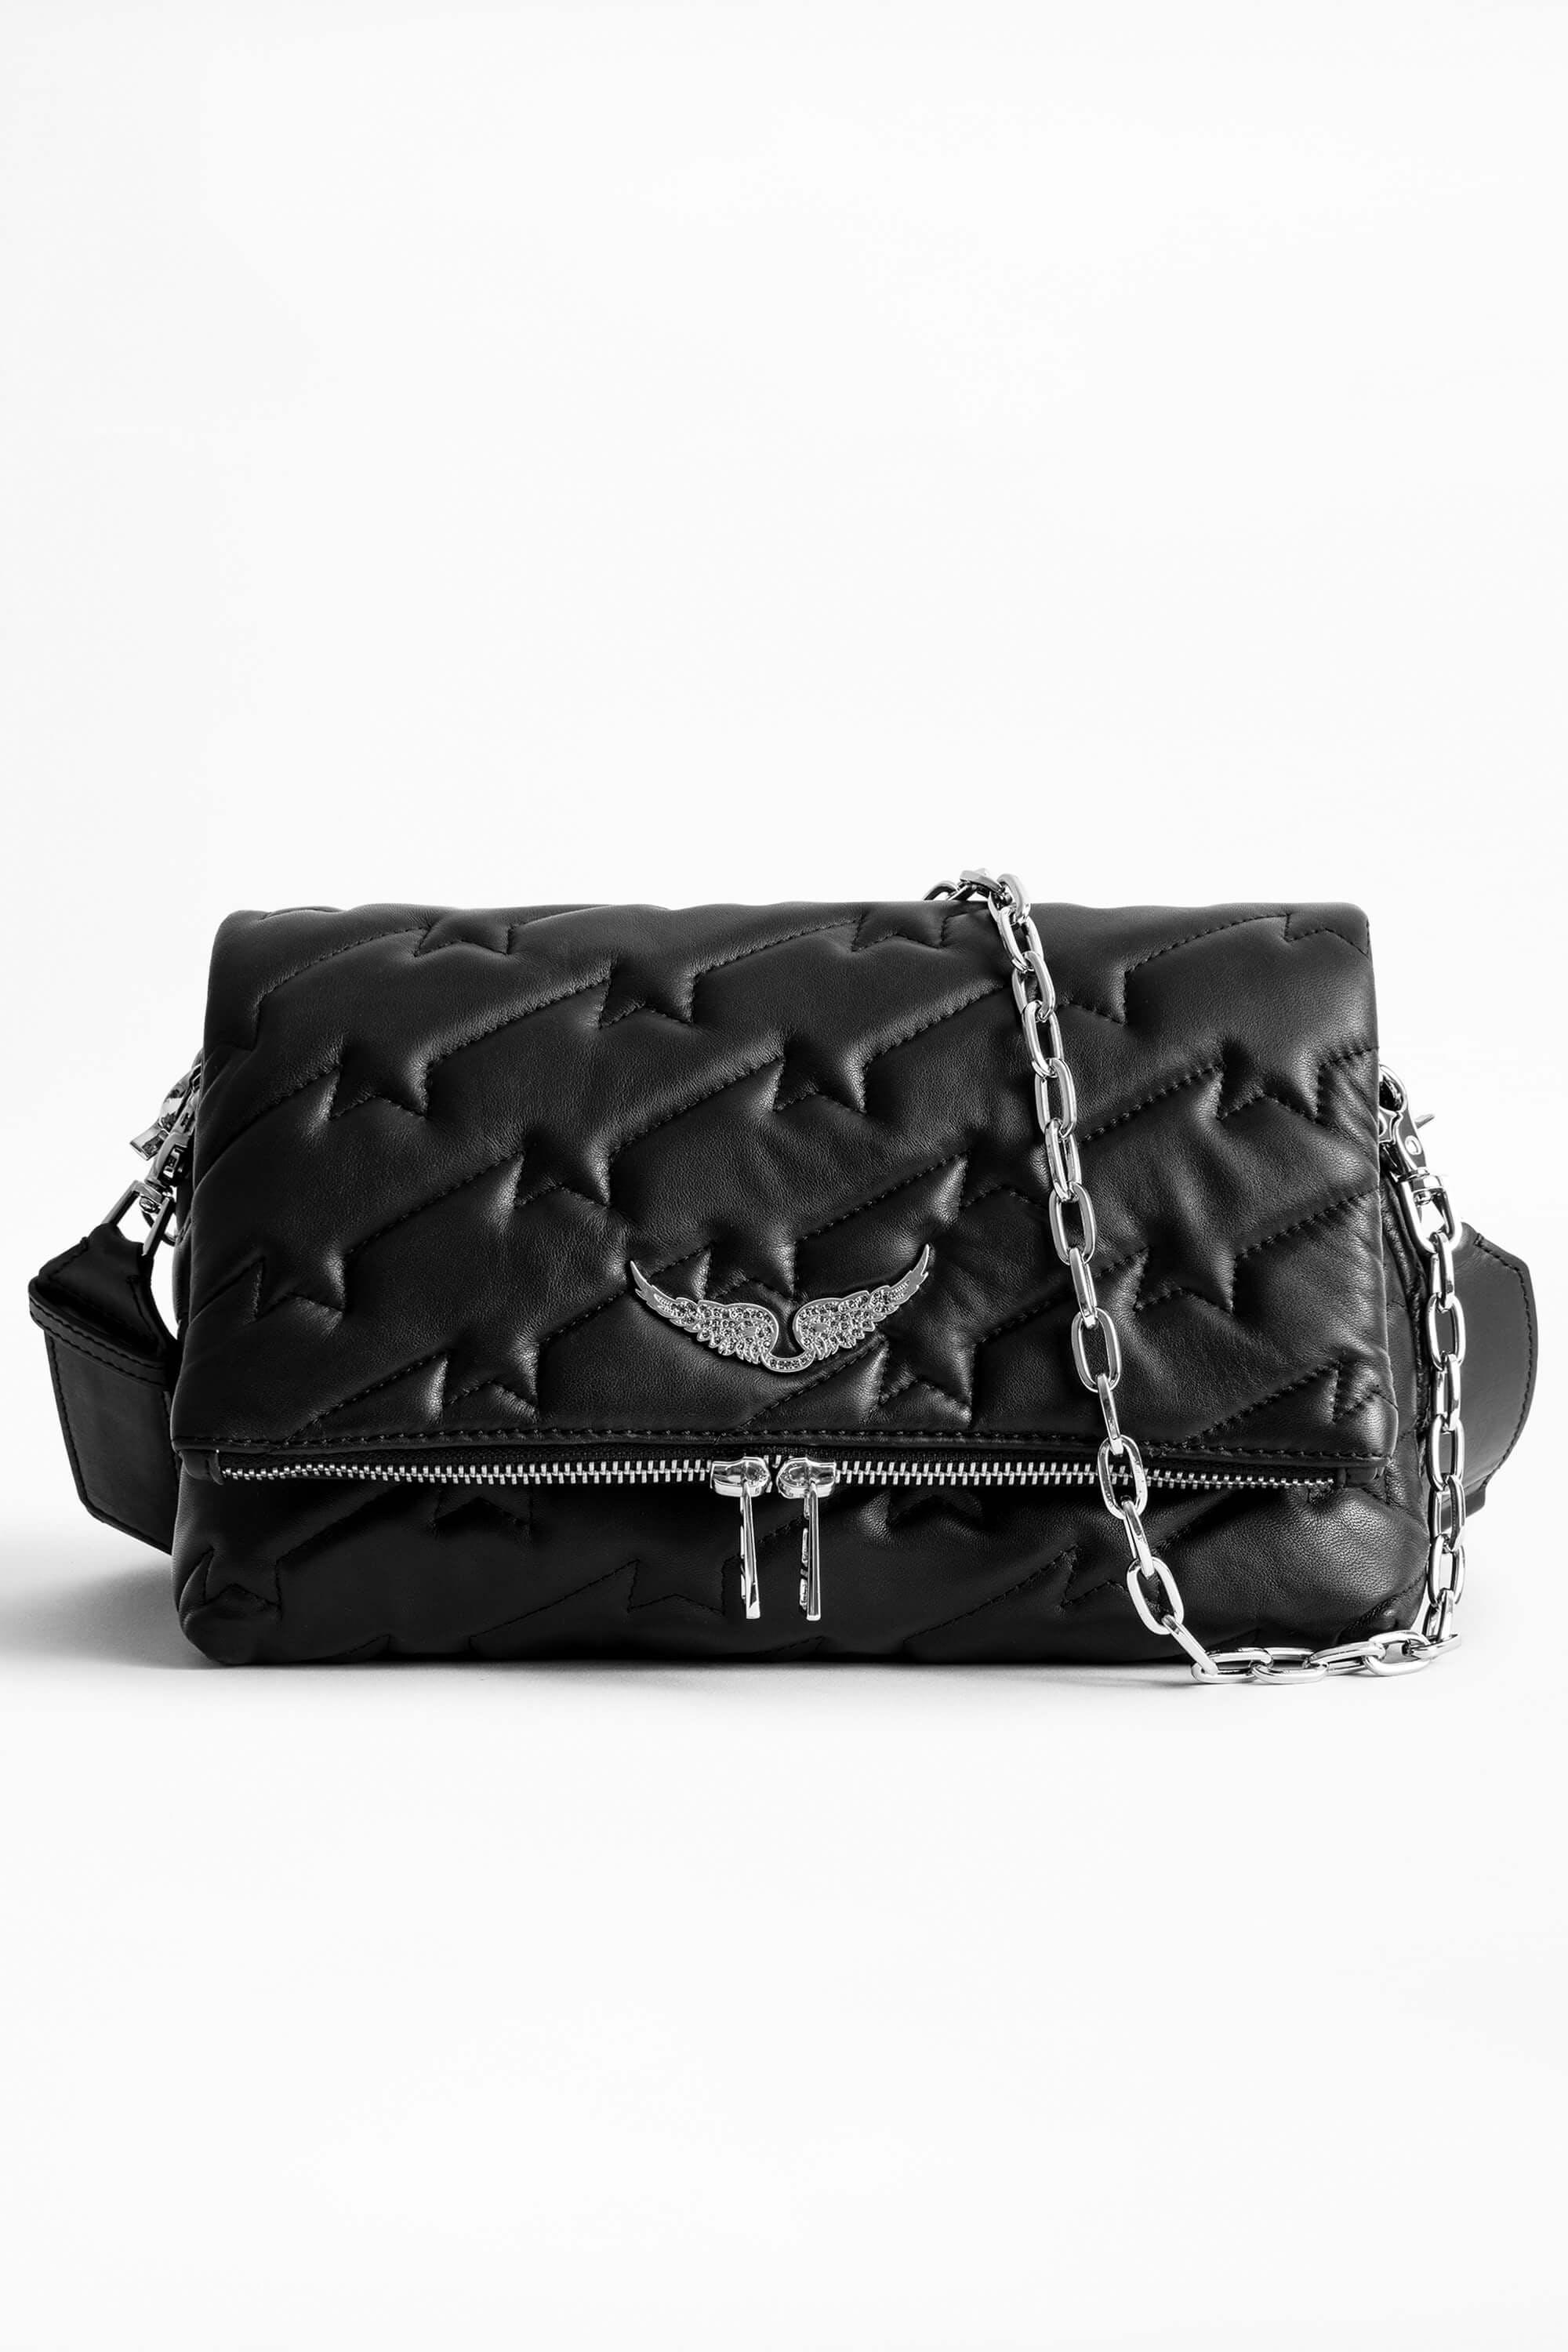 Rock Zv Quilted Clutch new Zealand, SAVE 32% - aveclumiere.com